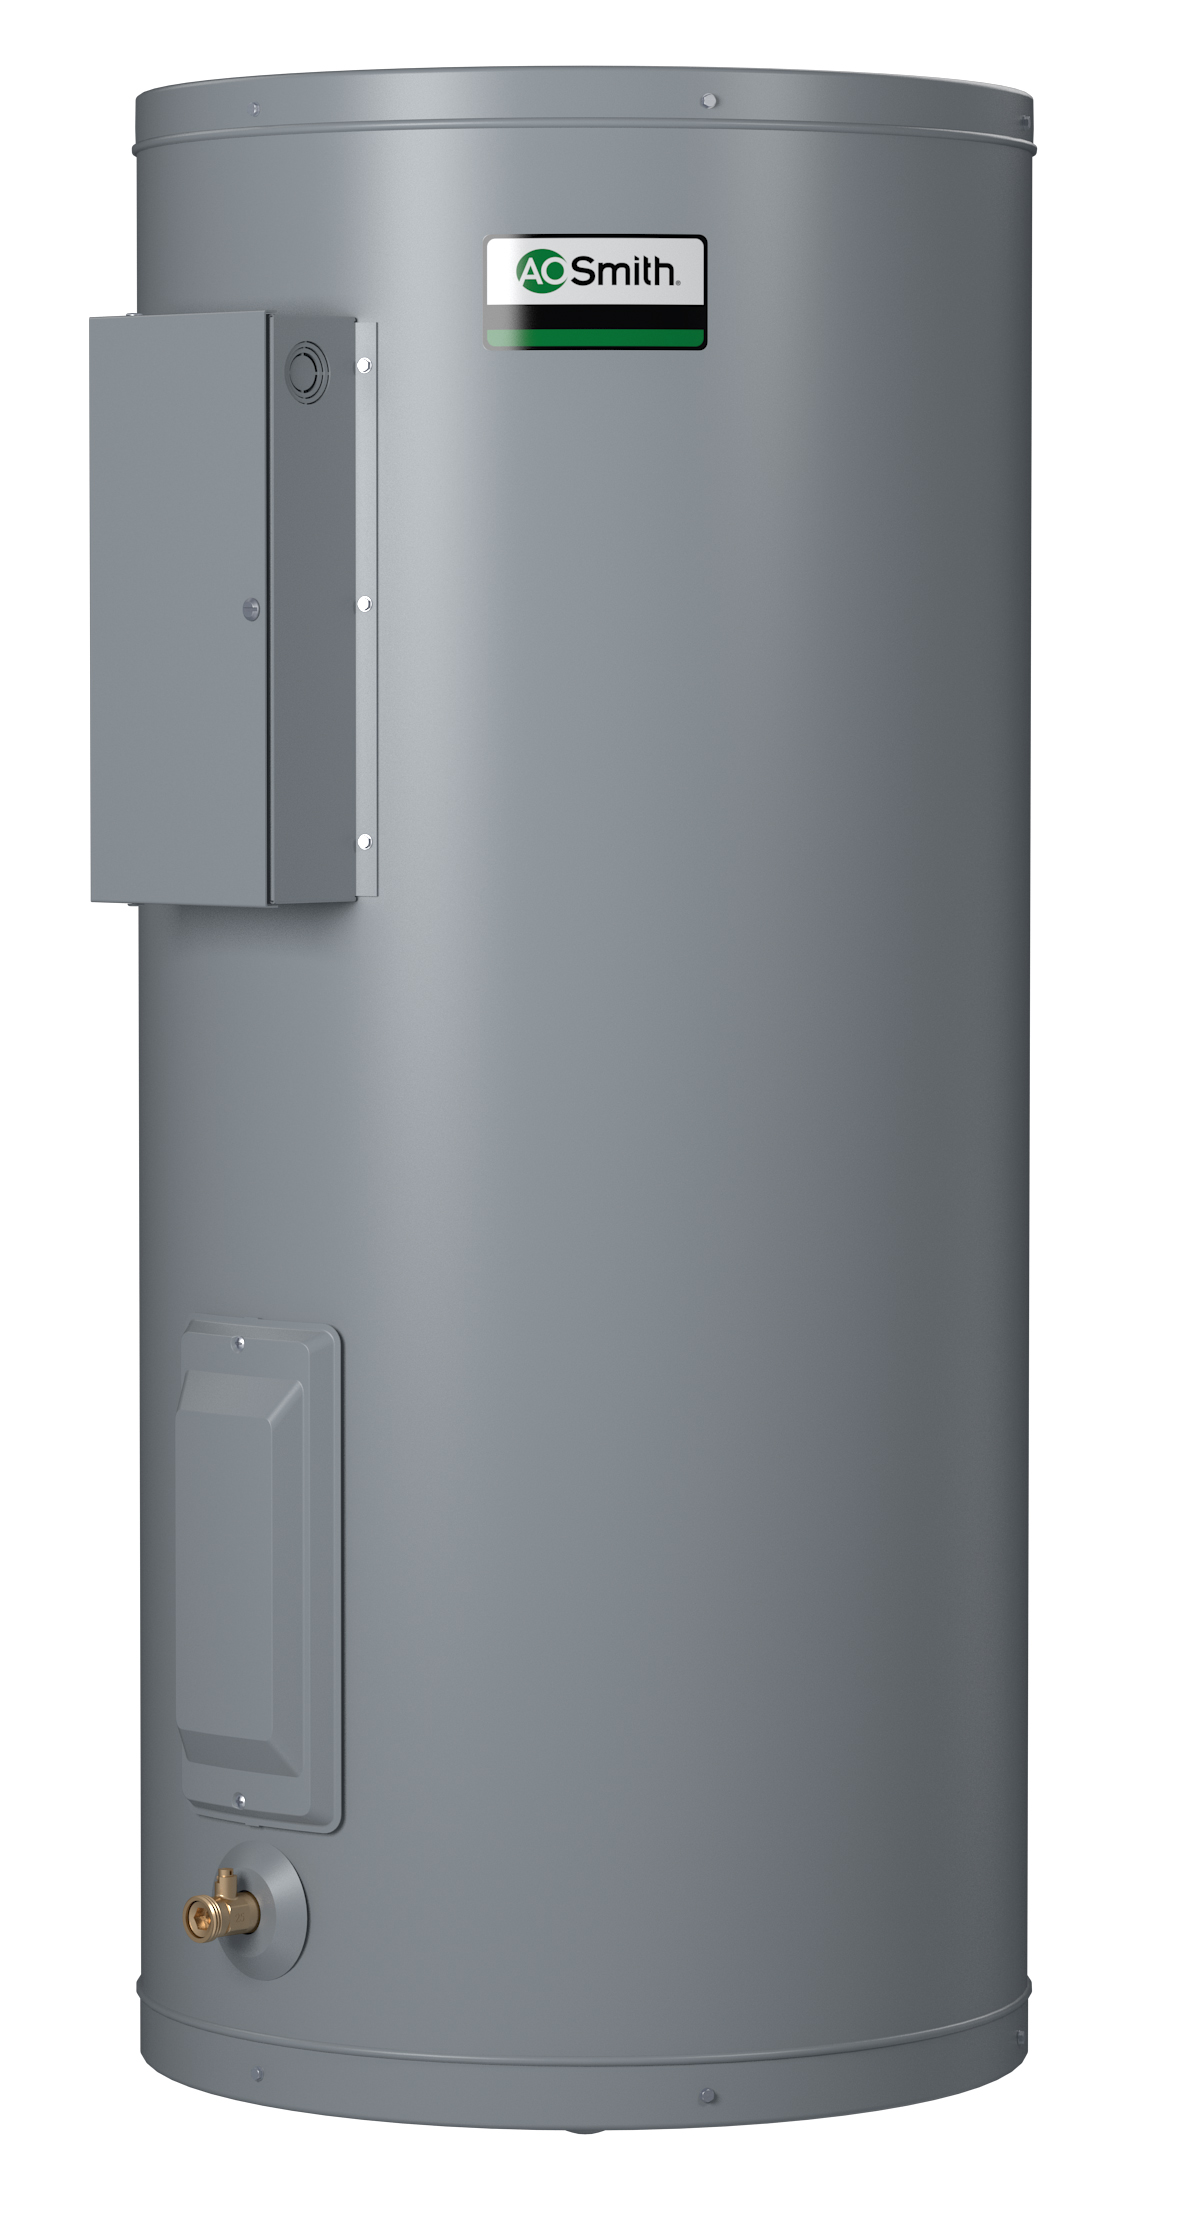 AO SMITH DEN-40D: 50 GALLONS, 4.5KW, 480 VOLT, 3 PHASE, (2-4500 WATT ELEMENTS, NON-SIMULTANEOUS WIRING), DURA-POWER, LIGHT DUTY COMMERCIAL ELECTRIC WATER HEATER